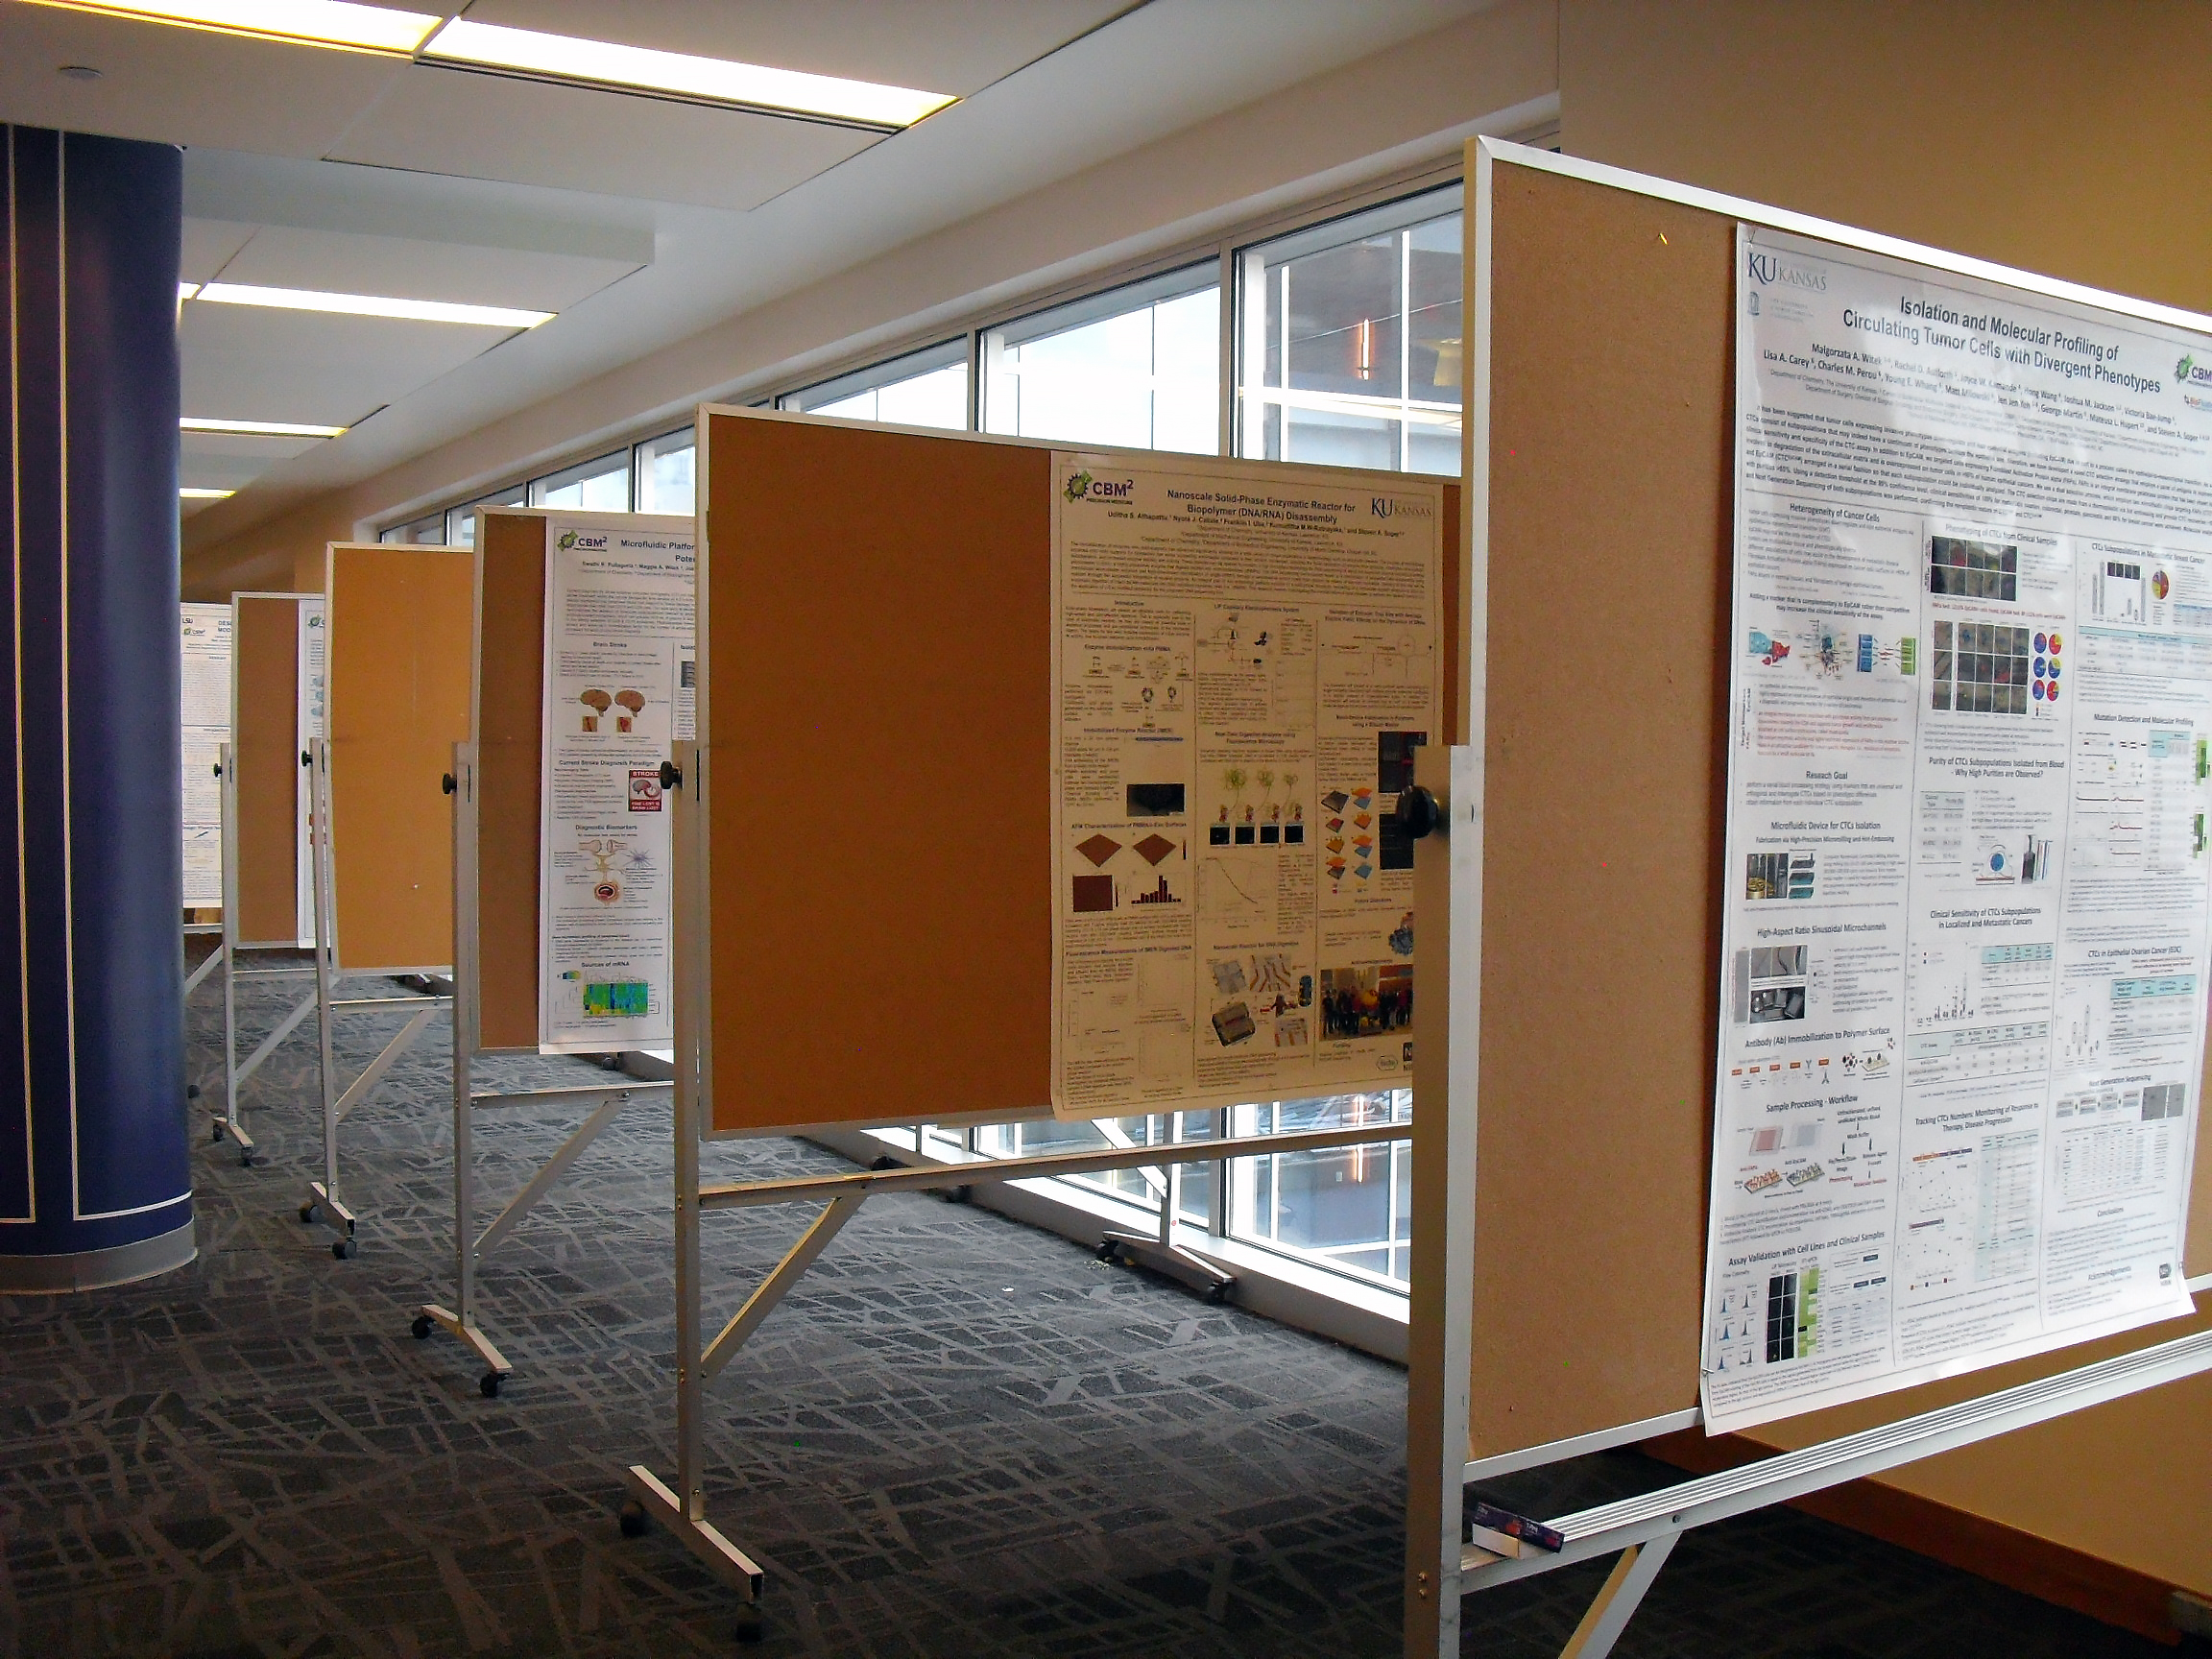 A row of six research posters displayed on stands, with no people present.